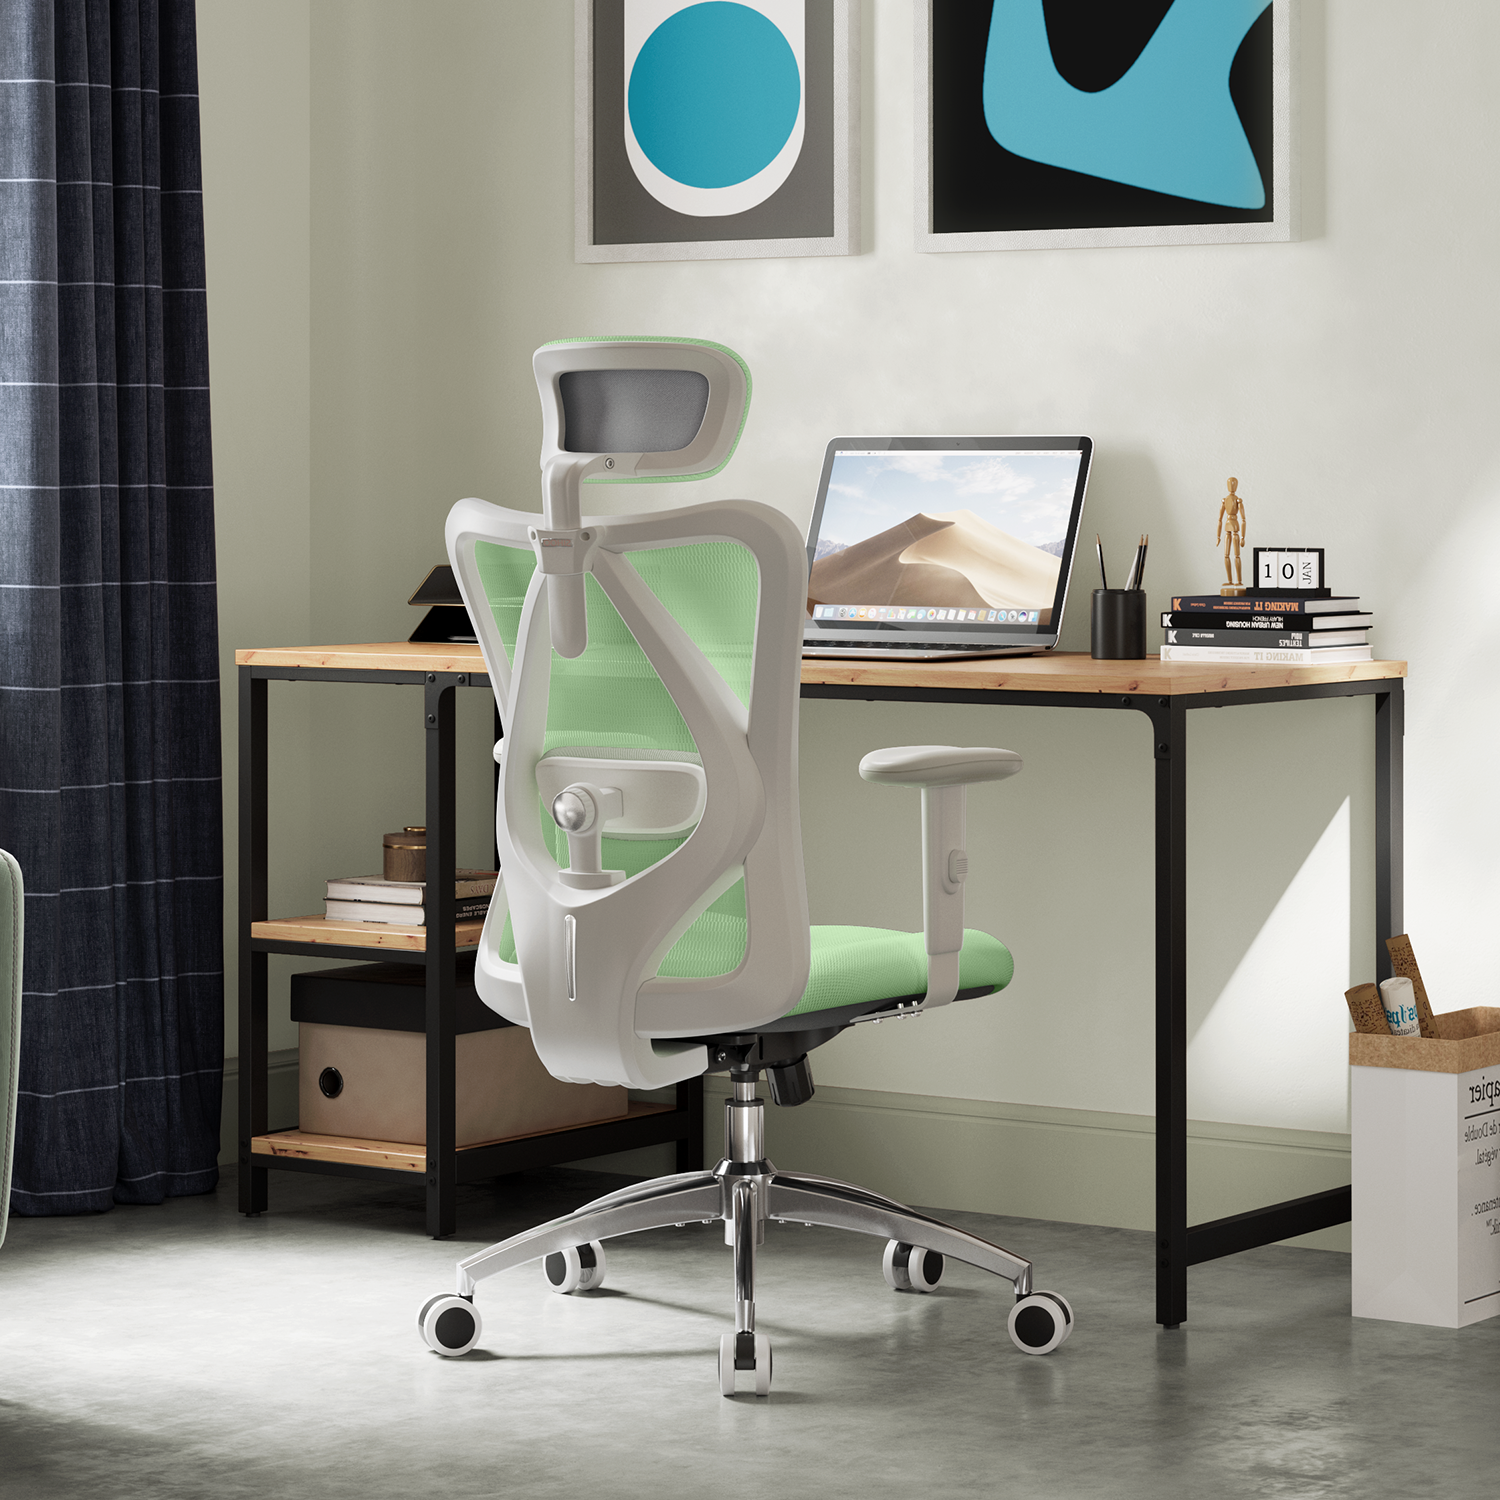 SIHOO Ergonomic Office Chair, Mesh Computer Desk Chair with Adjustable Lumbar Support, High Back chair for Big and Tall, White and Green - image 2 of 11